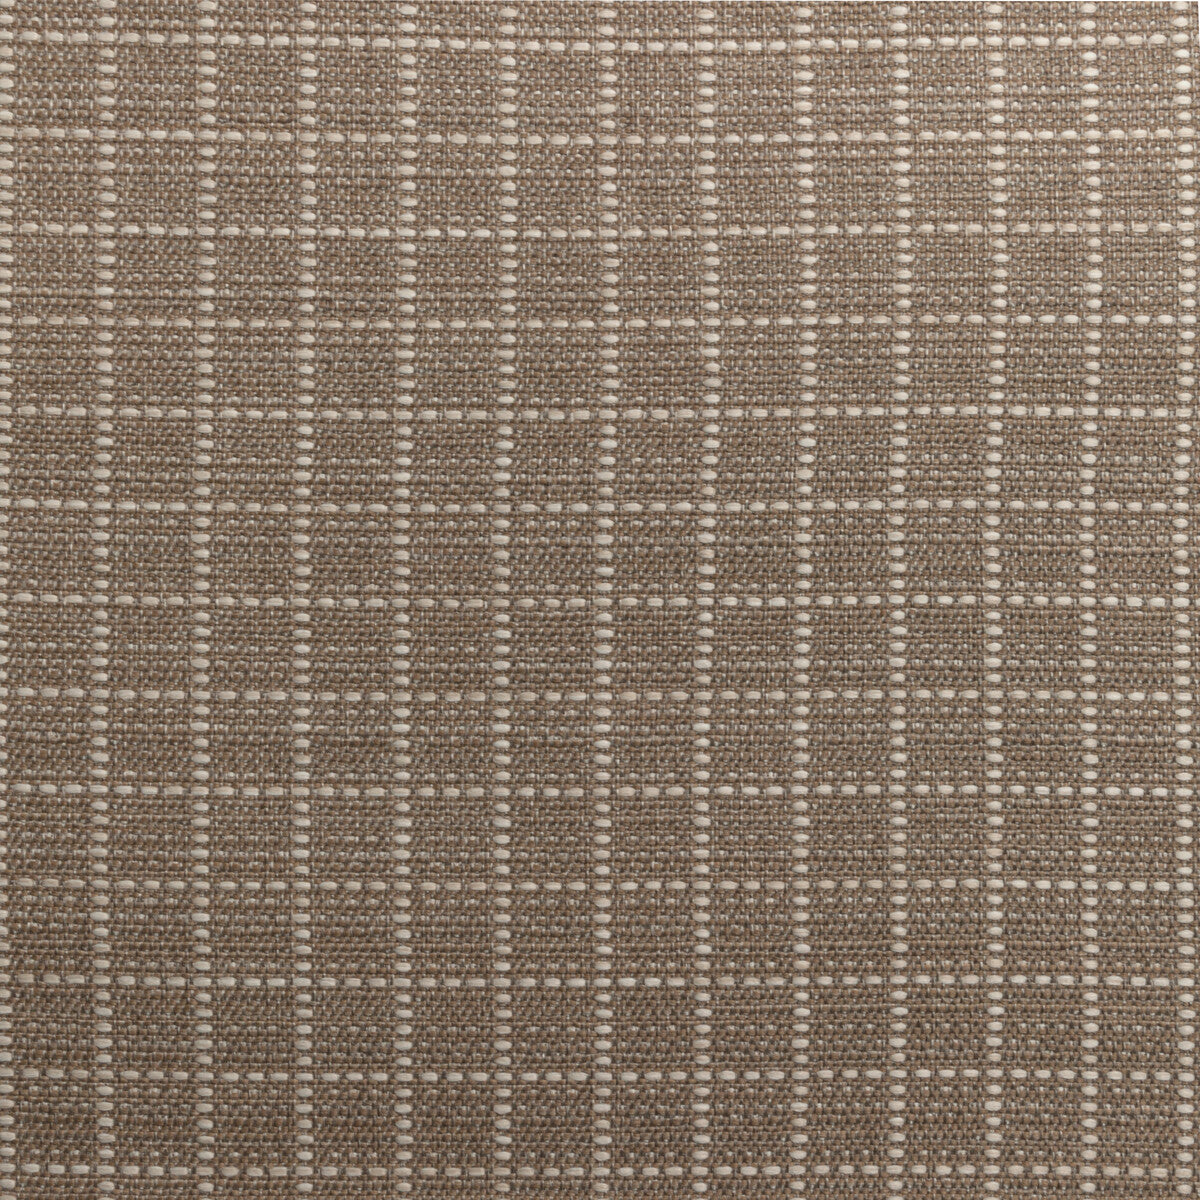 Kravet Smart fabric in 36304-16 color - pattern 36304.16.0 - by Kravet Smart in the Performance Crypton Home collection